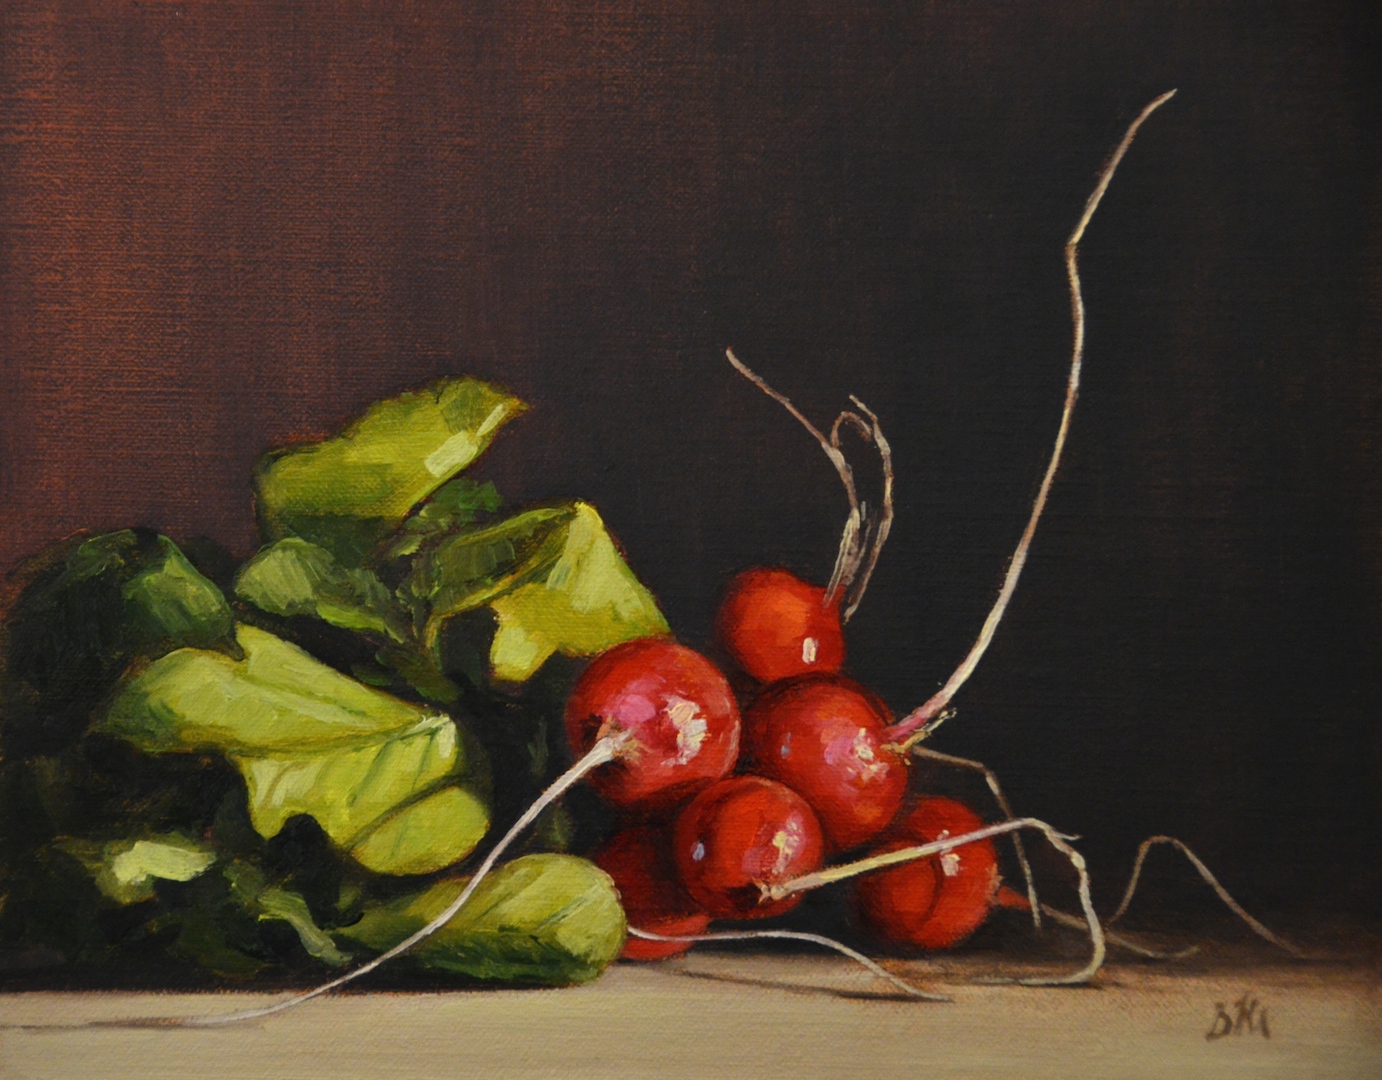 "Bunch of Radishes" by Begoña Morton